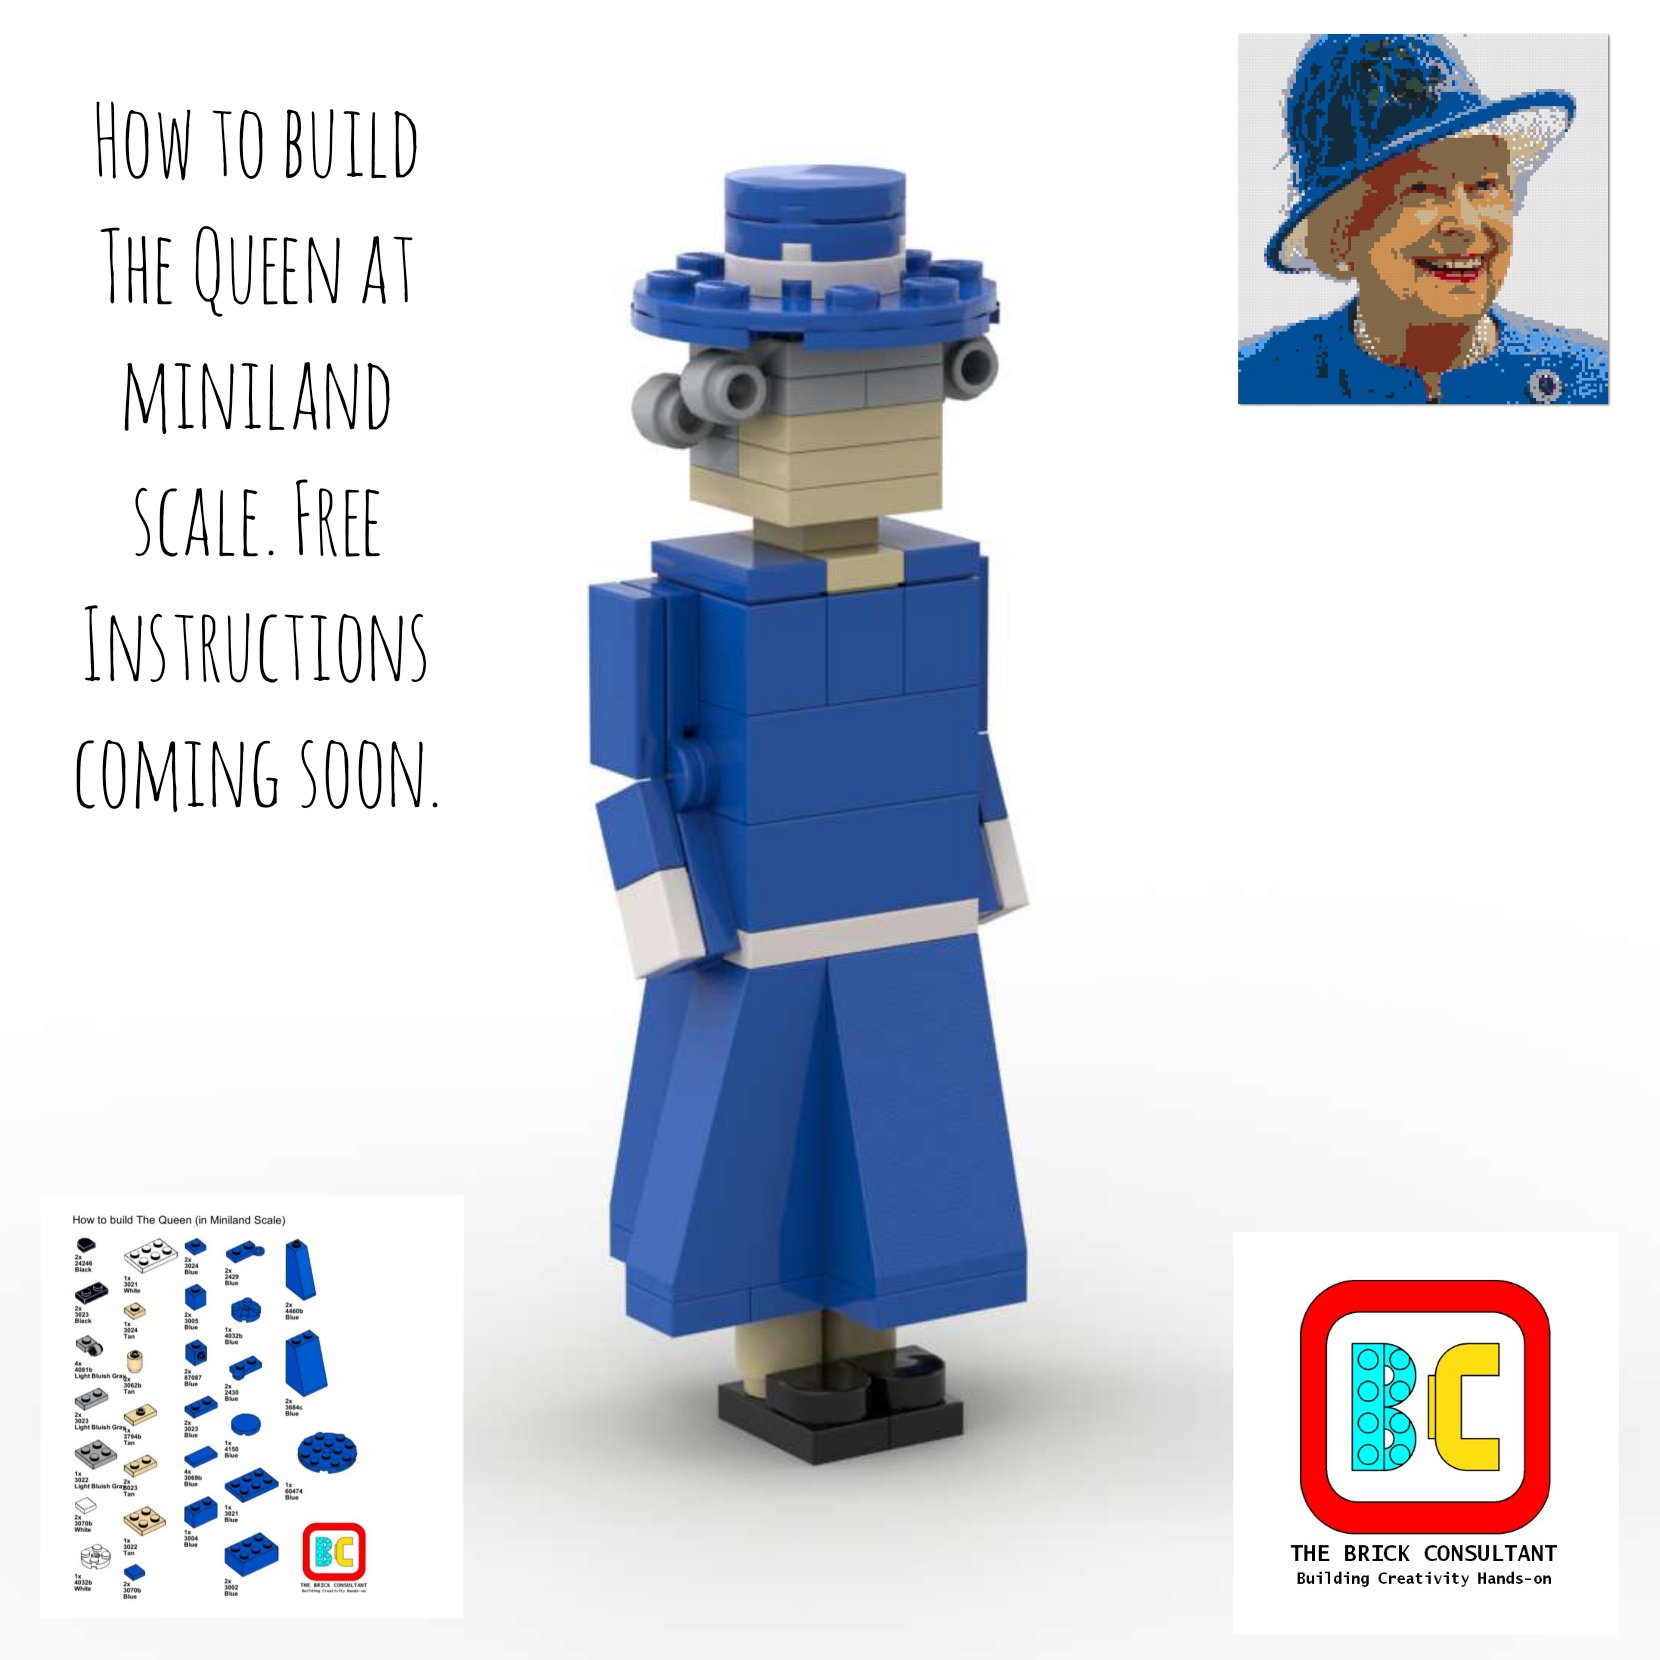 thebrickconsultant on Twitter: "To celebrate Queen Elizabeth II Platinum  Jubilee, have a go at building a miniland scale figure. Instructions to  follow soon. #LEGO #instructions #queenelizabeth #platinumjubilee #miniland  #legoland https://t.co ...